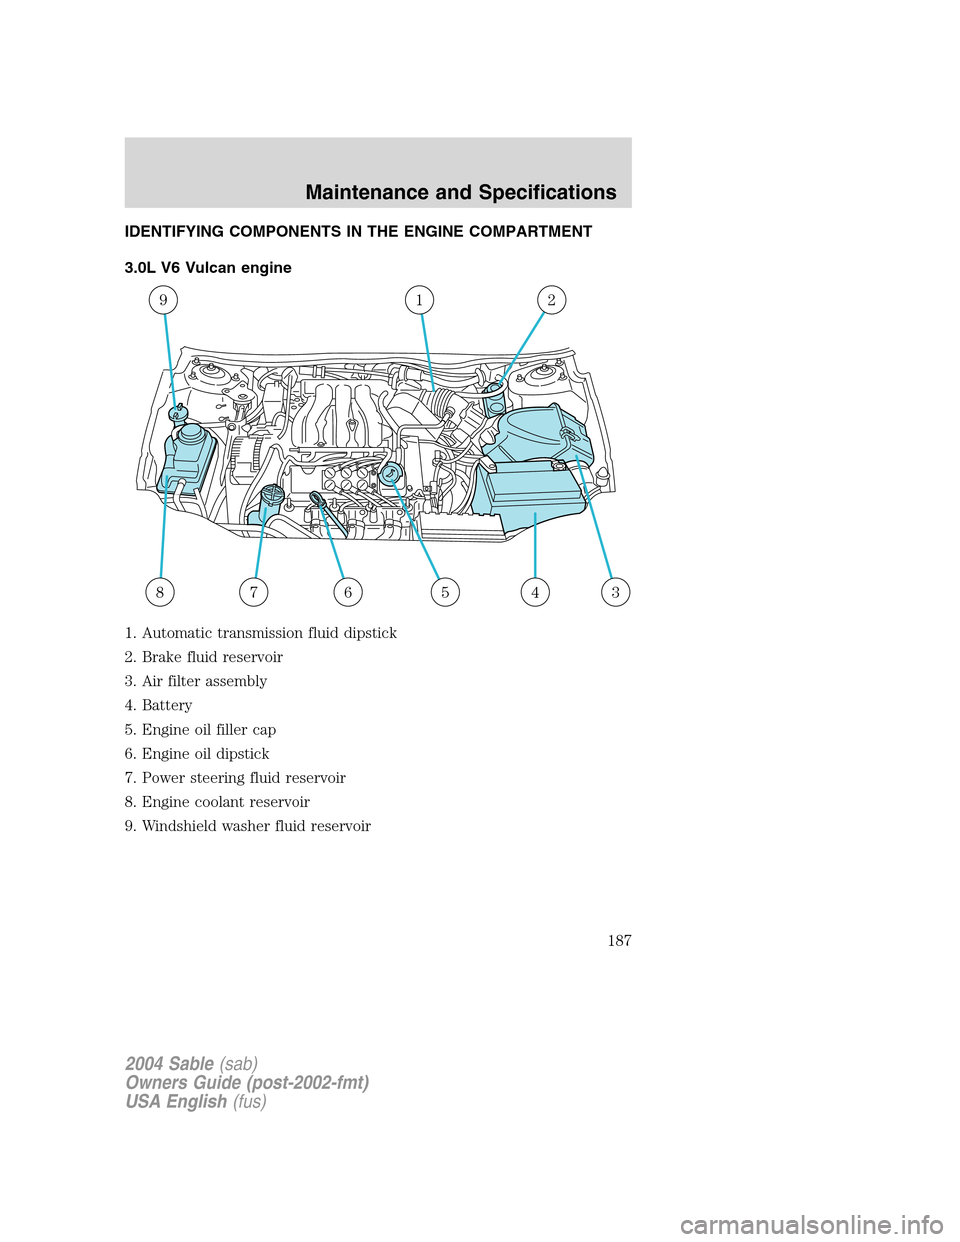 Mercury Sable 2004  Owners Manuals IDENTIFYING COMPONENTS IN THE ENGINE COMPARTMENT
3.0L V6 Vulcan engine
1. Automatic transmission fluid dipstick
2. Brake fluid reservoir
3. Air filter assembly
4. Battery
5. Engine oil filler cap
6. E